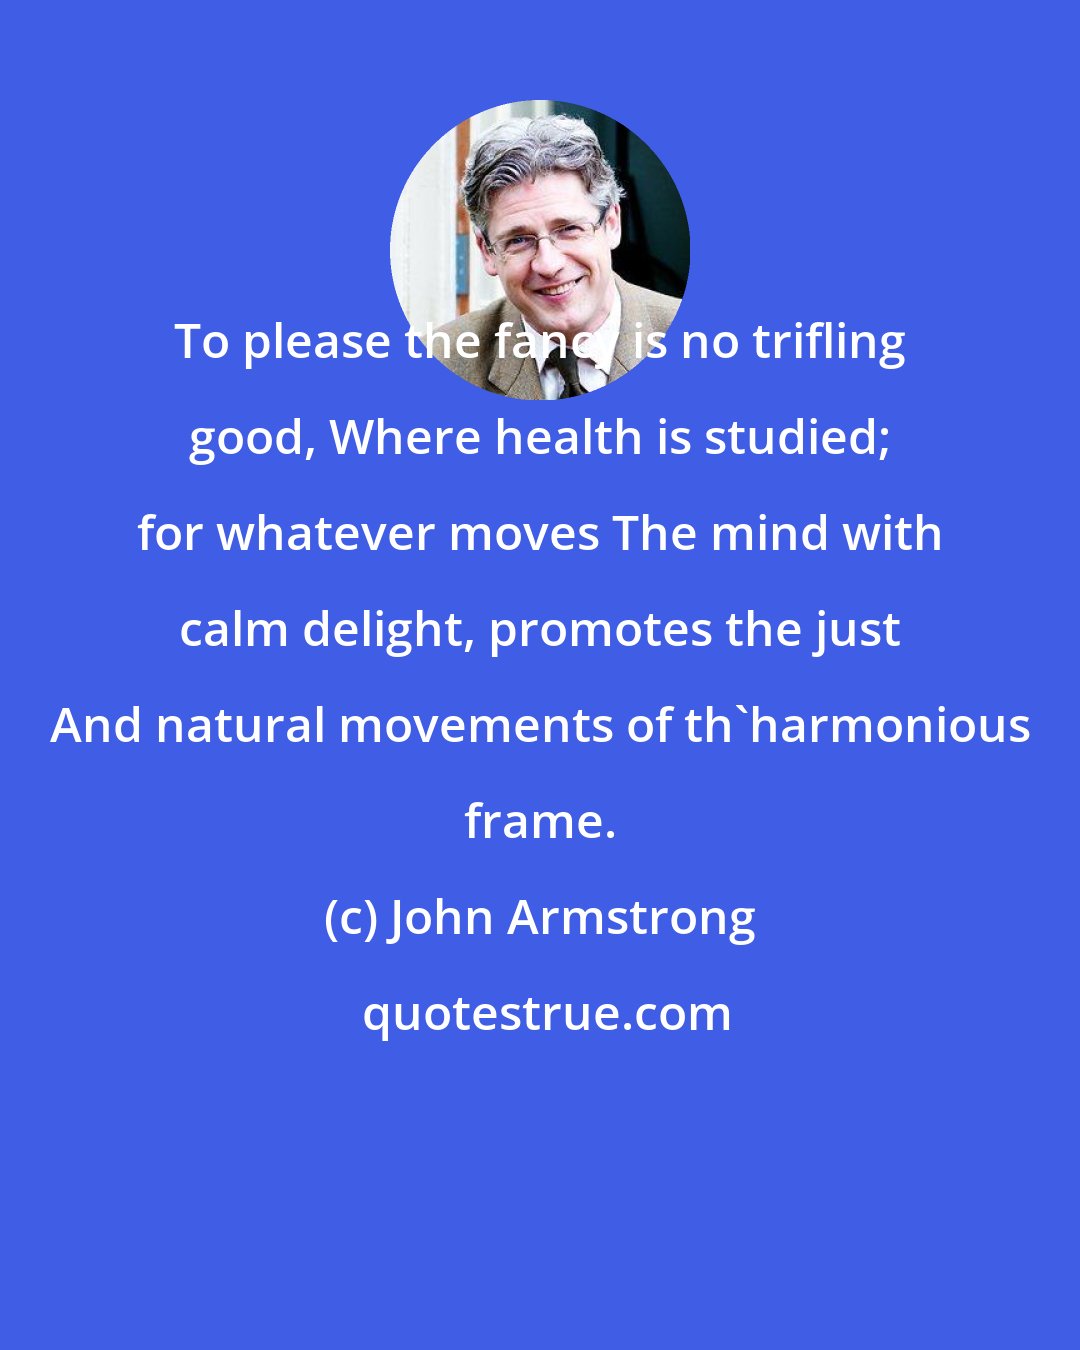 John Armstrong: To please the fancy is no trifling good, Where health is studied; for whatever moves The mind with calm delight, promotes the just And natural movements of th'harmonious frame.